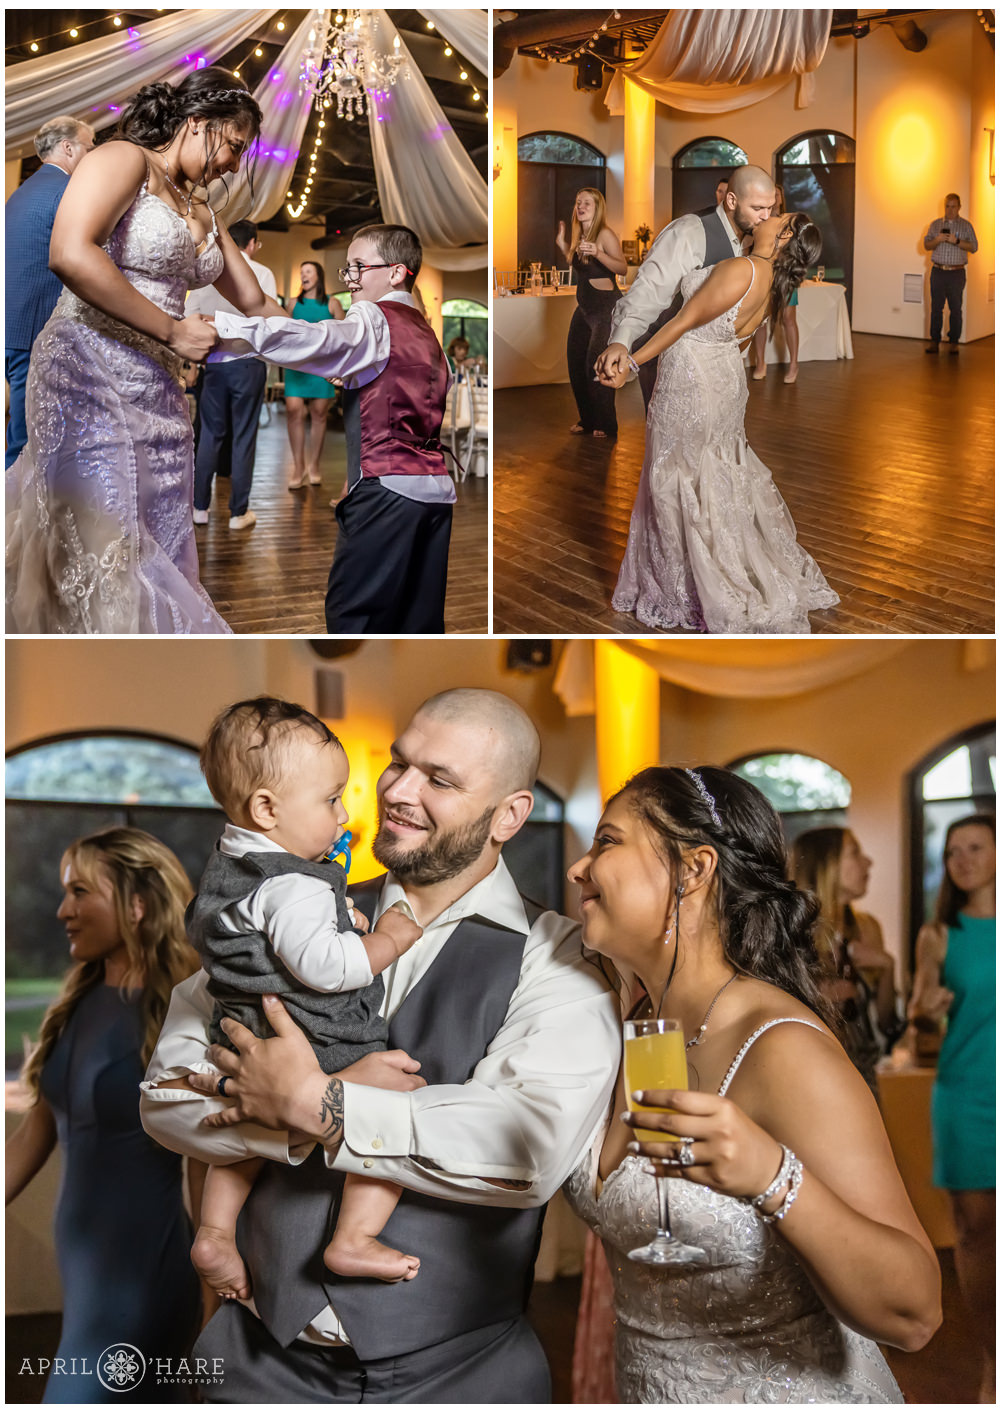 Photo collage of wedding dance floor moments at Wellshire Event Center in Denver